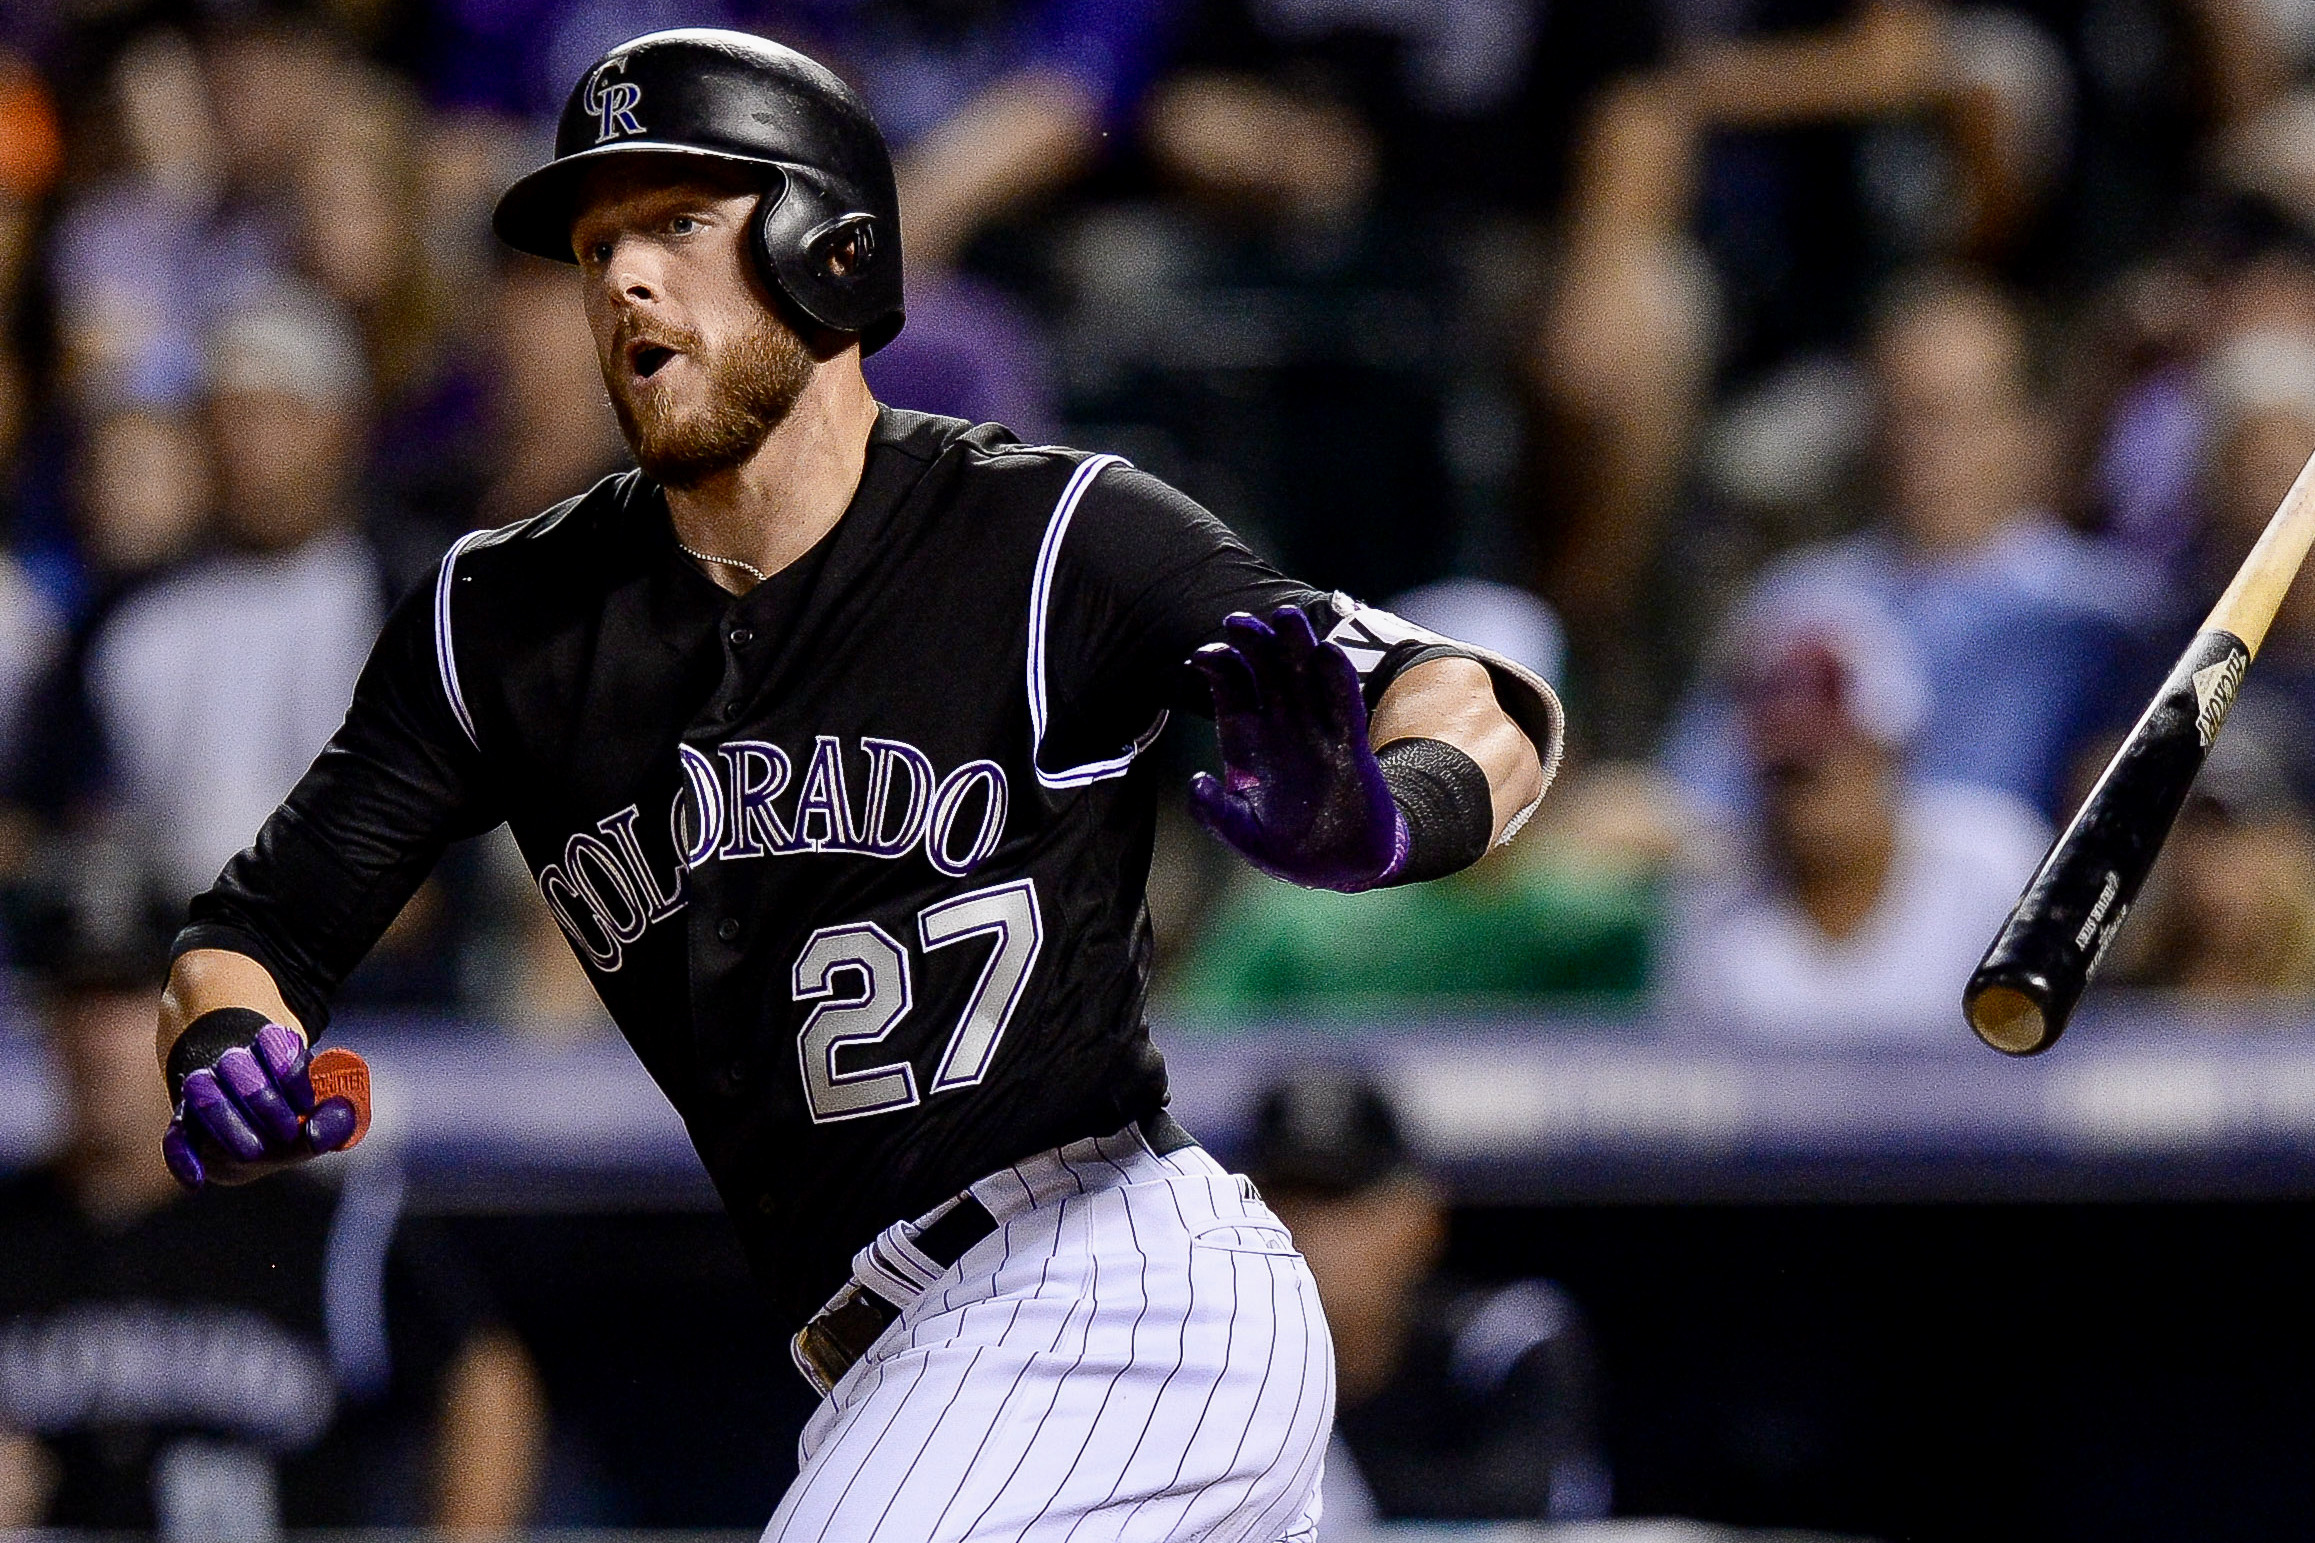 20 HRs for Trevor Story! He is moving - Colorado Rockies